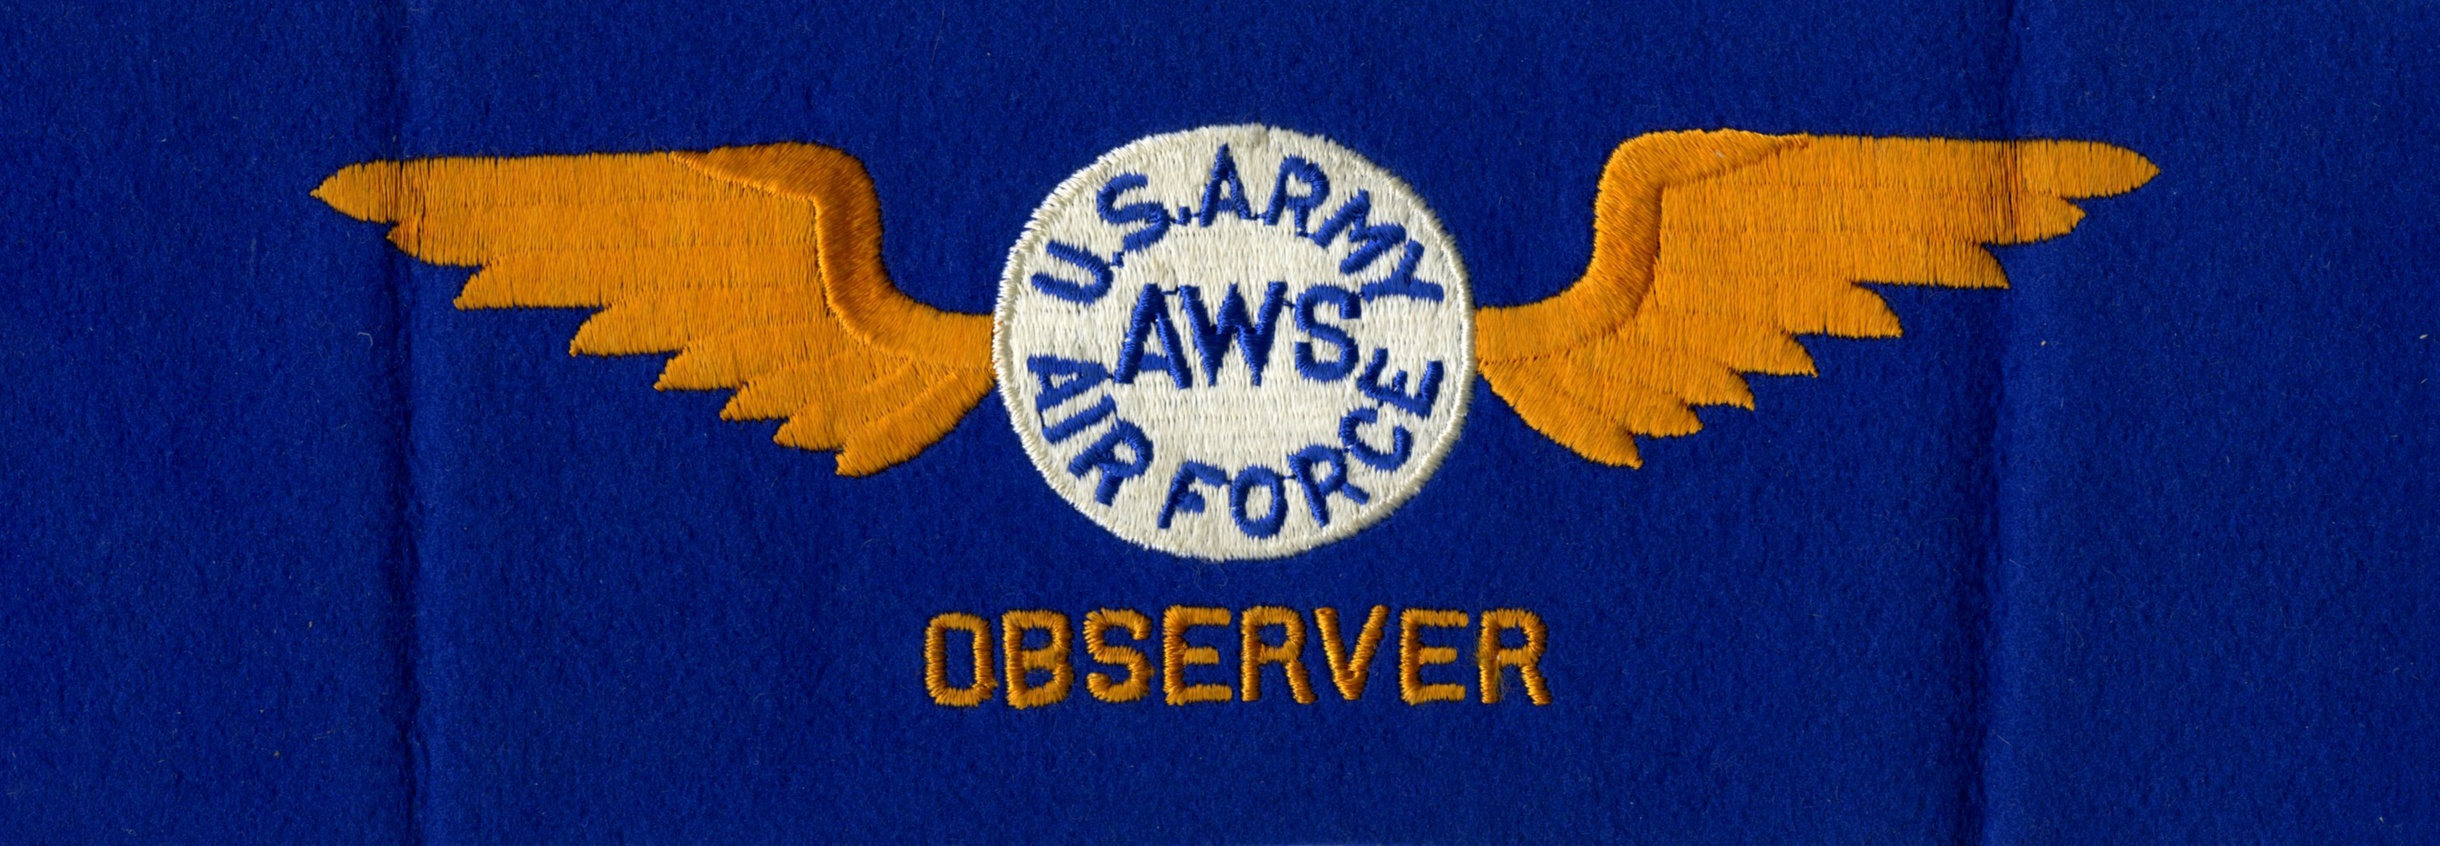 An embroidered white circle on blue fabric has the words “U.S. ARMY AWS AIR FORCE” embroidered in blue letters. A pair of pale orange wings are embroidered on either side of the circle, and below it says “OBSERVER” in the same orange thread.